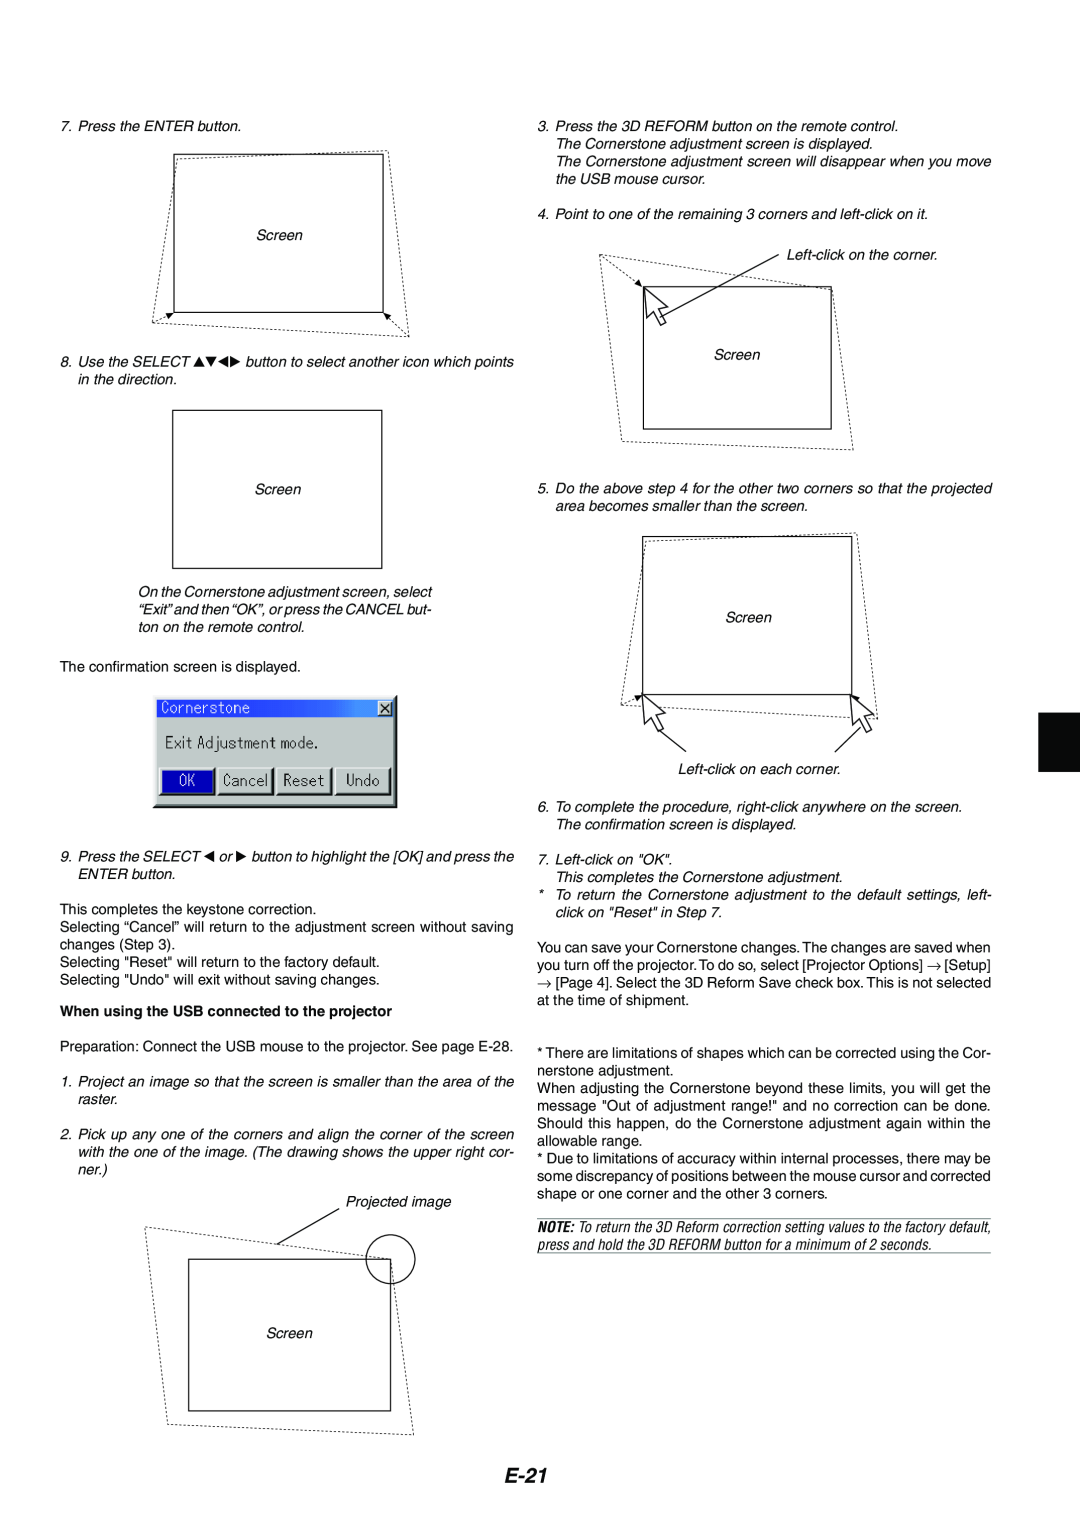 NEC MT1075/MT1065 user manual E-21, When using the USB connected to the projector 